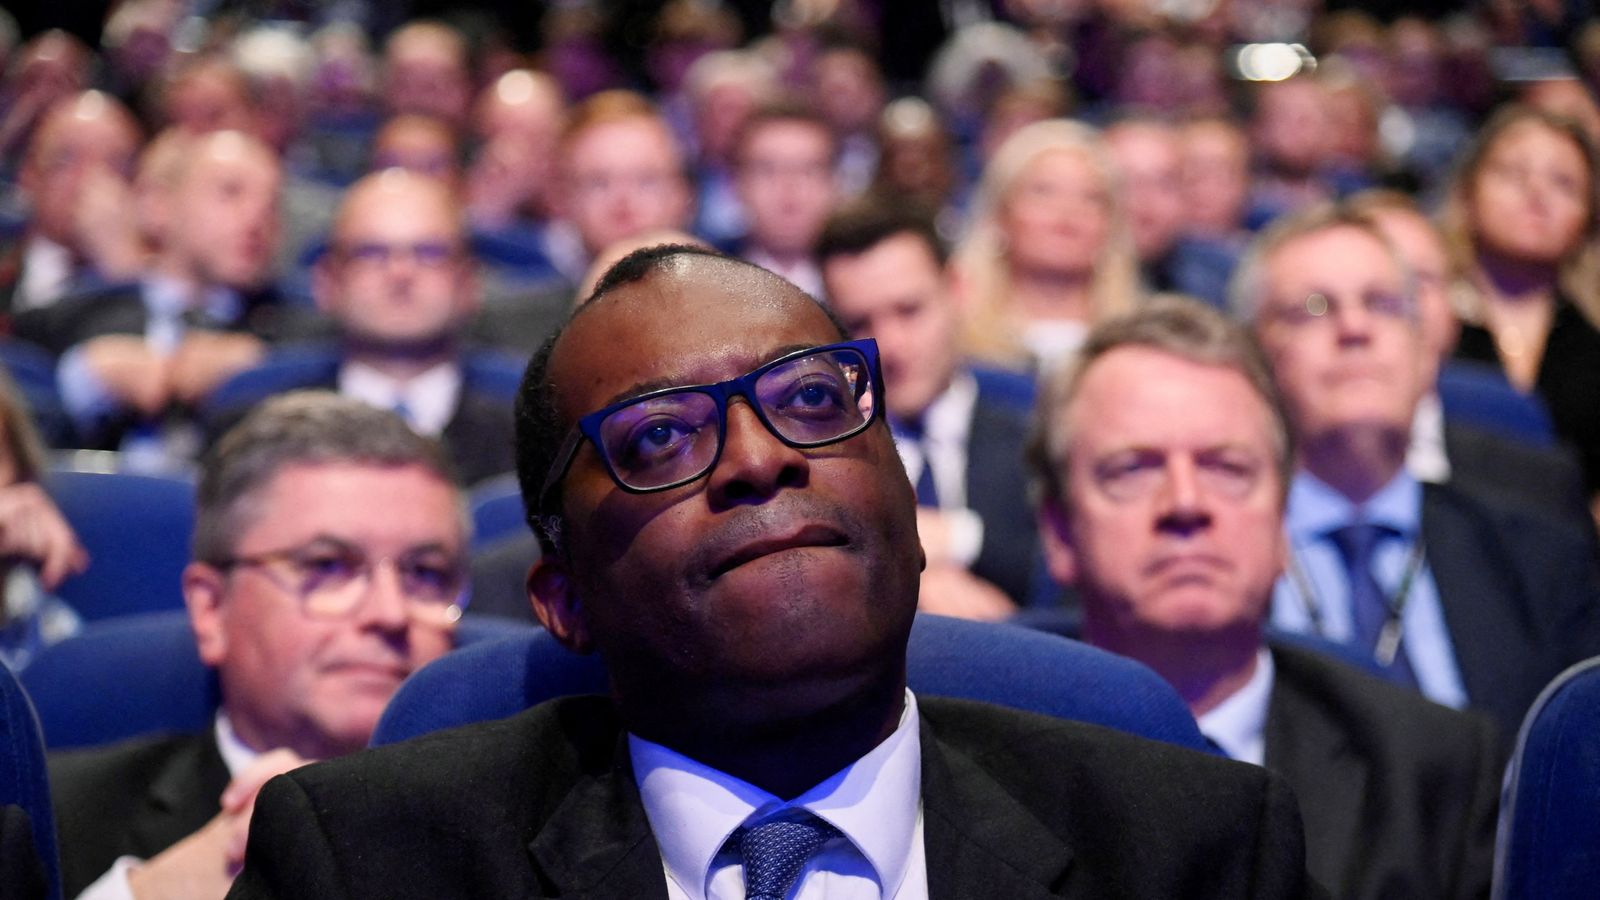 Kwasi Kwarteng's rise and fall, from Eton scholar to chancellor